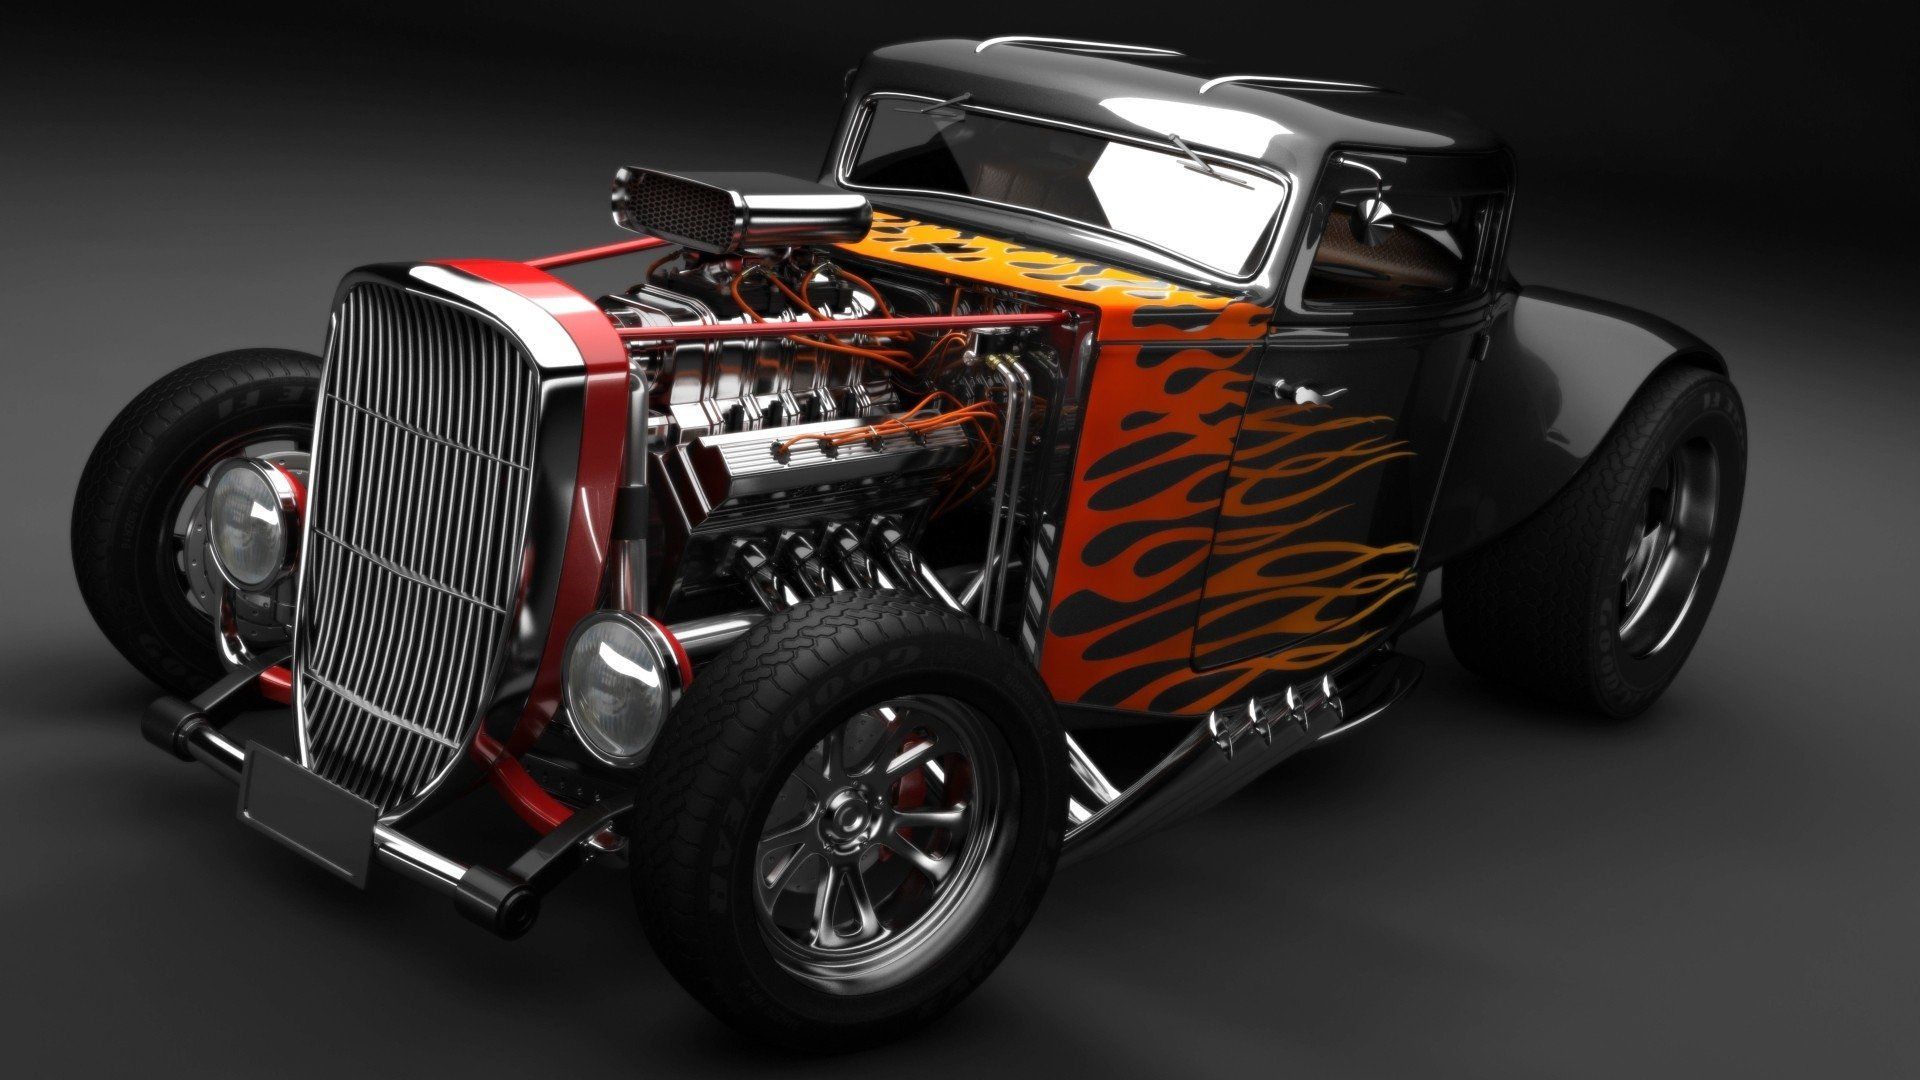 Hot Rod Wallpapers.